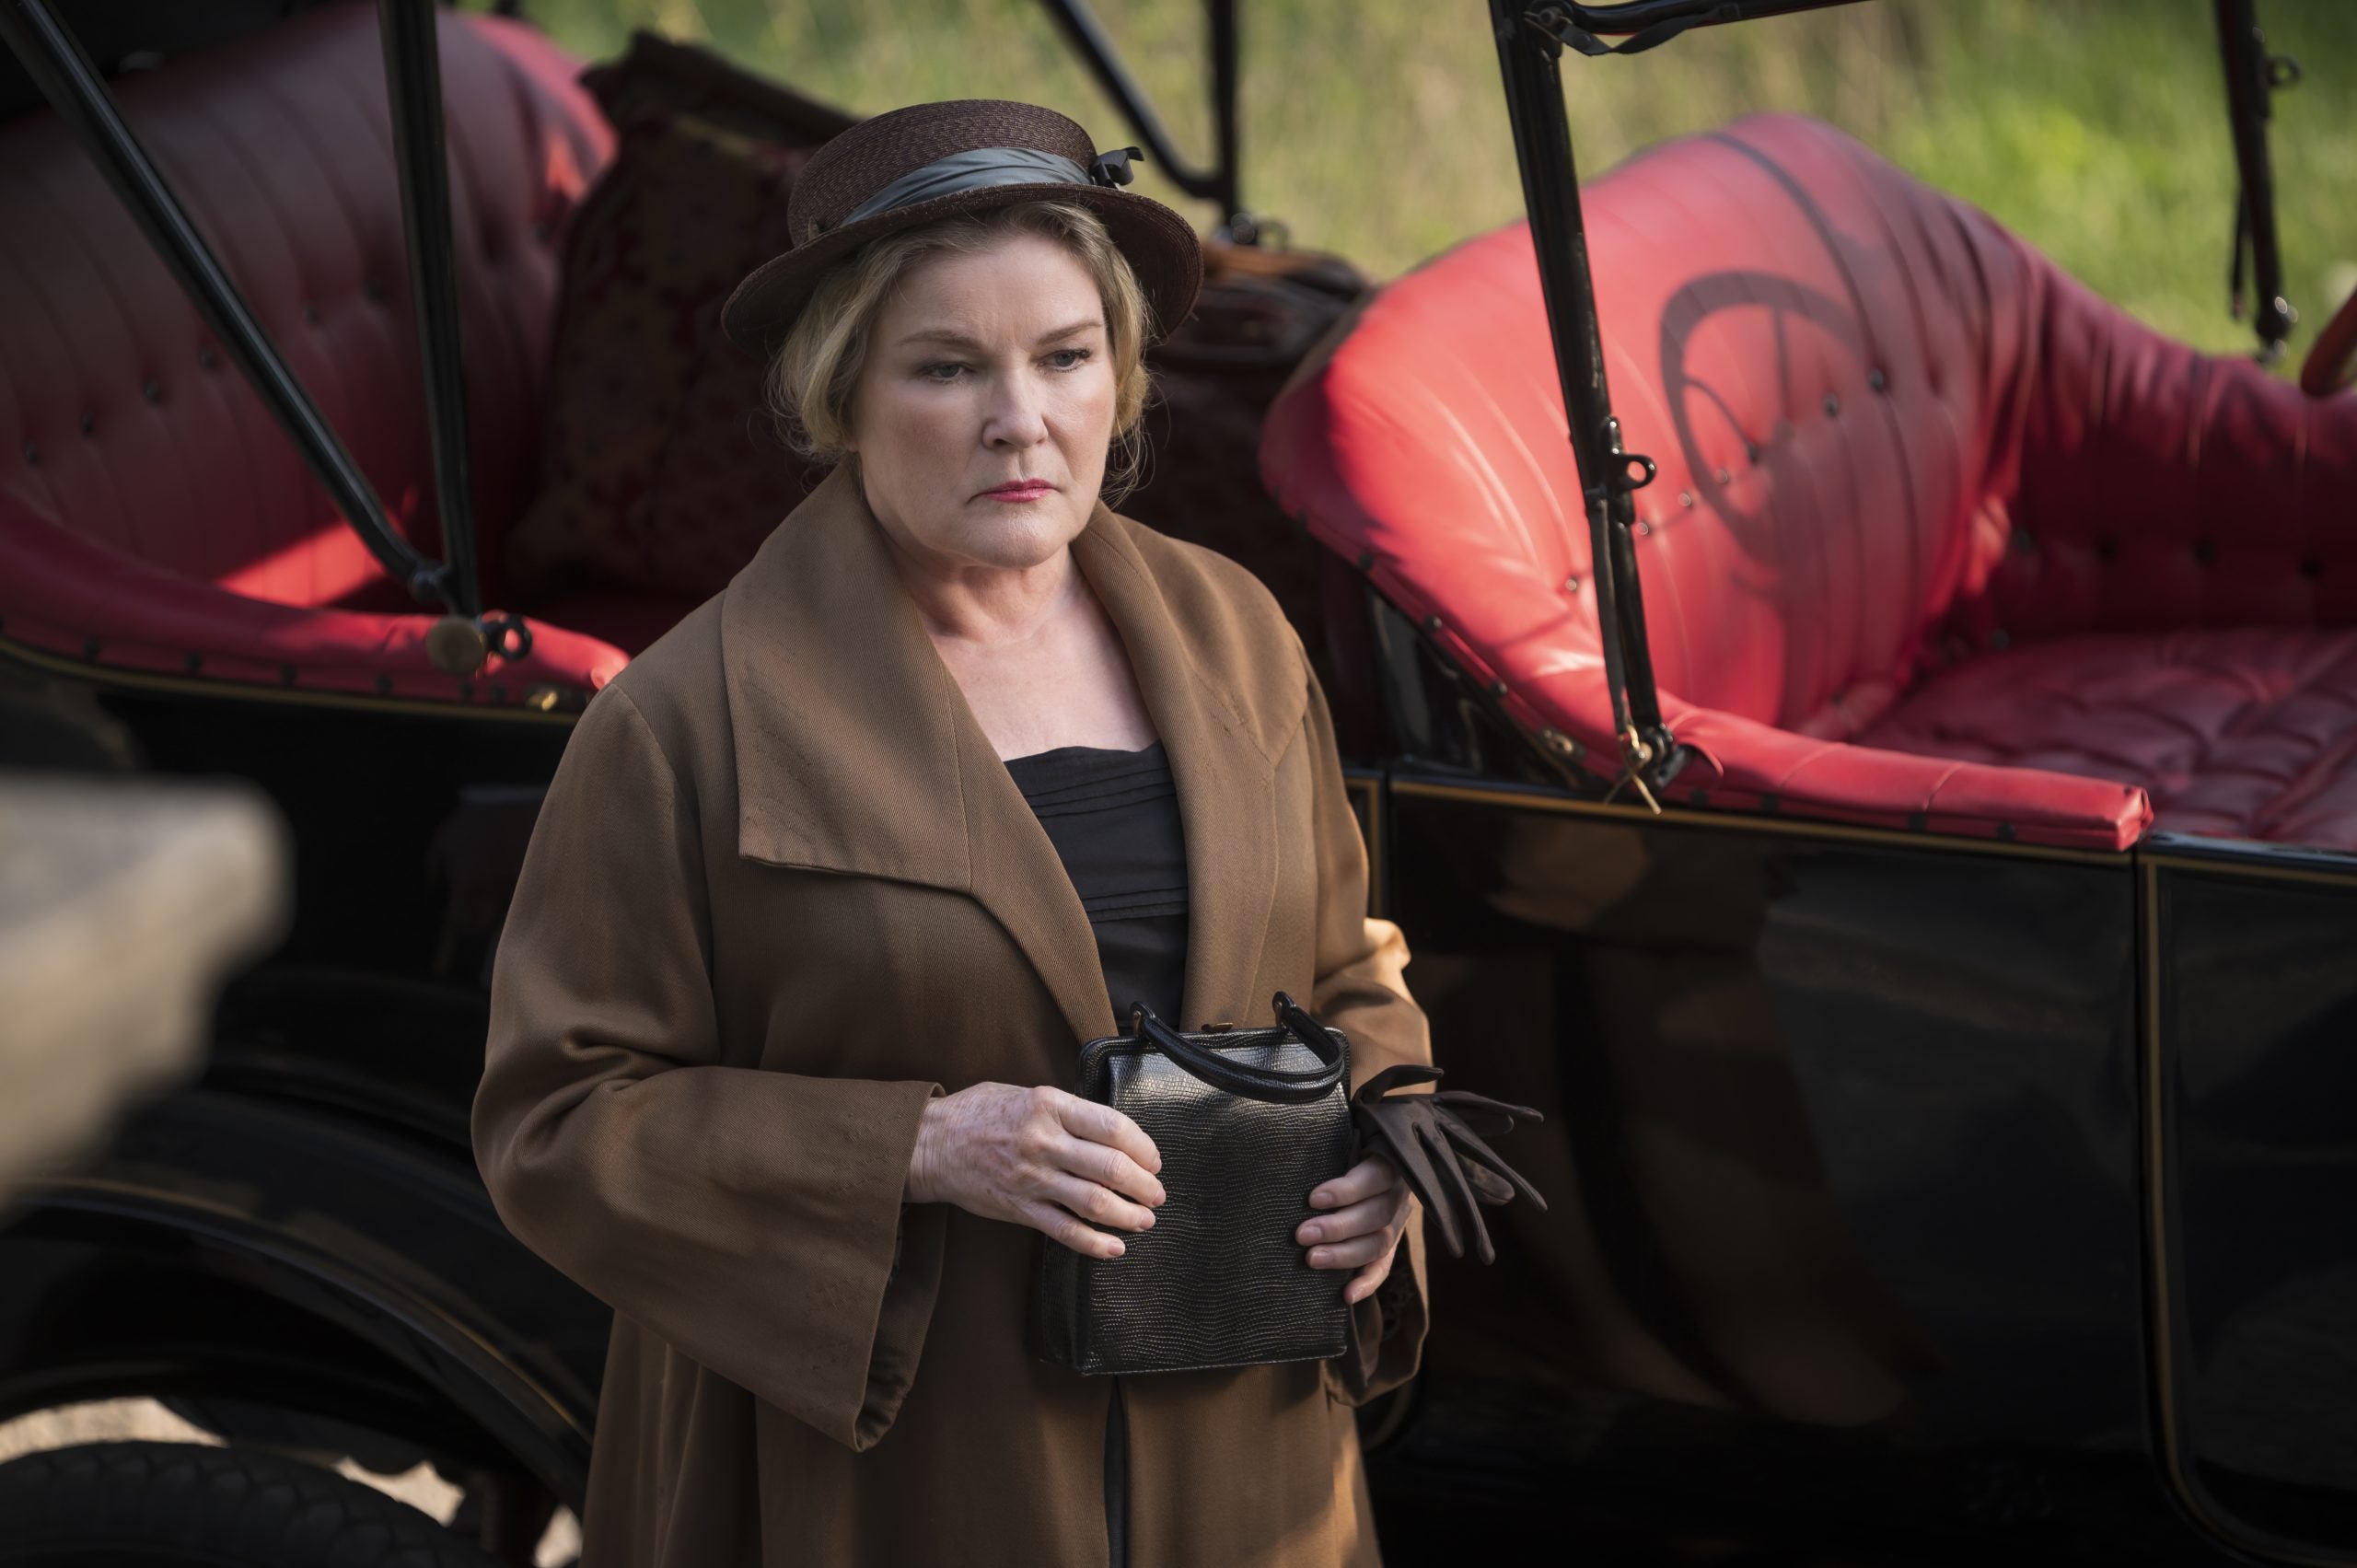 Kate Mulgrew as Mrs. Steiner, wearing a hat and standing in front of a car in 'Flowers in the Attic: The Origin'